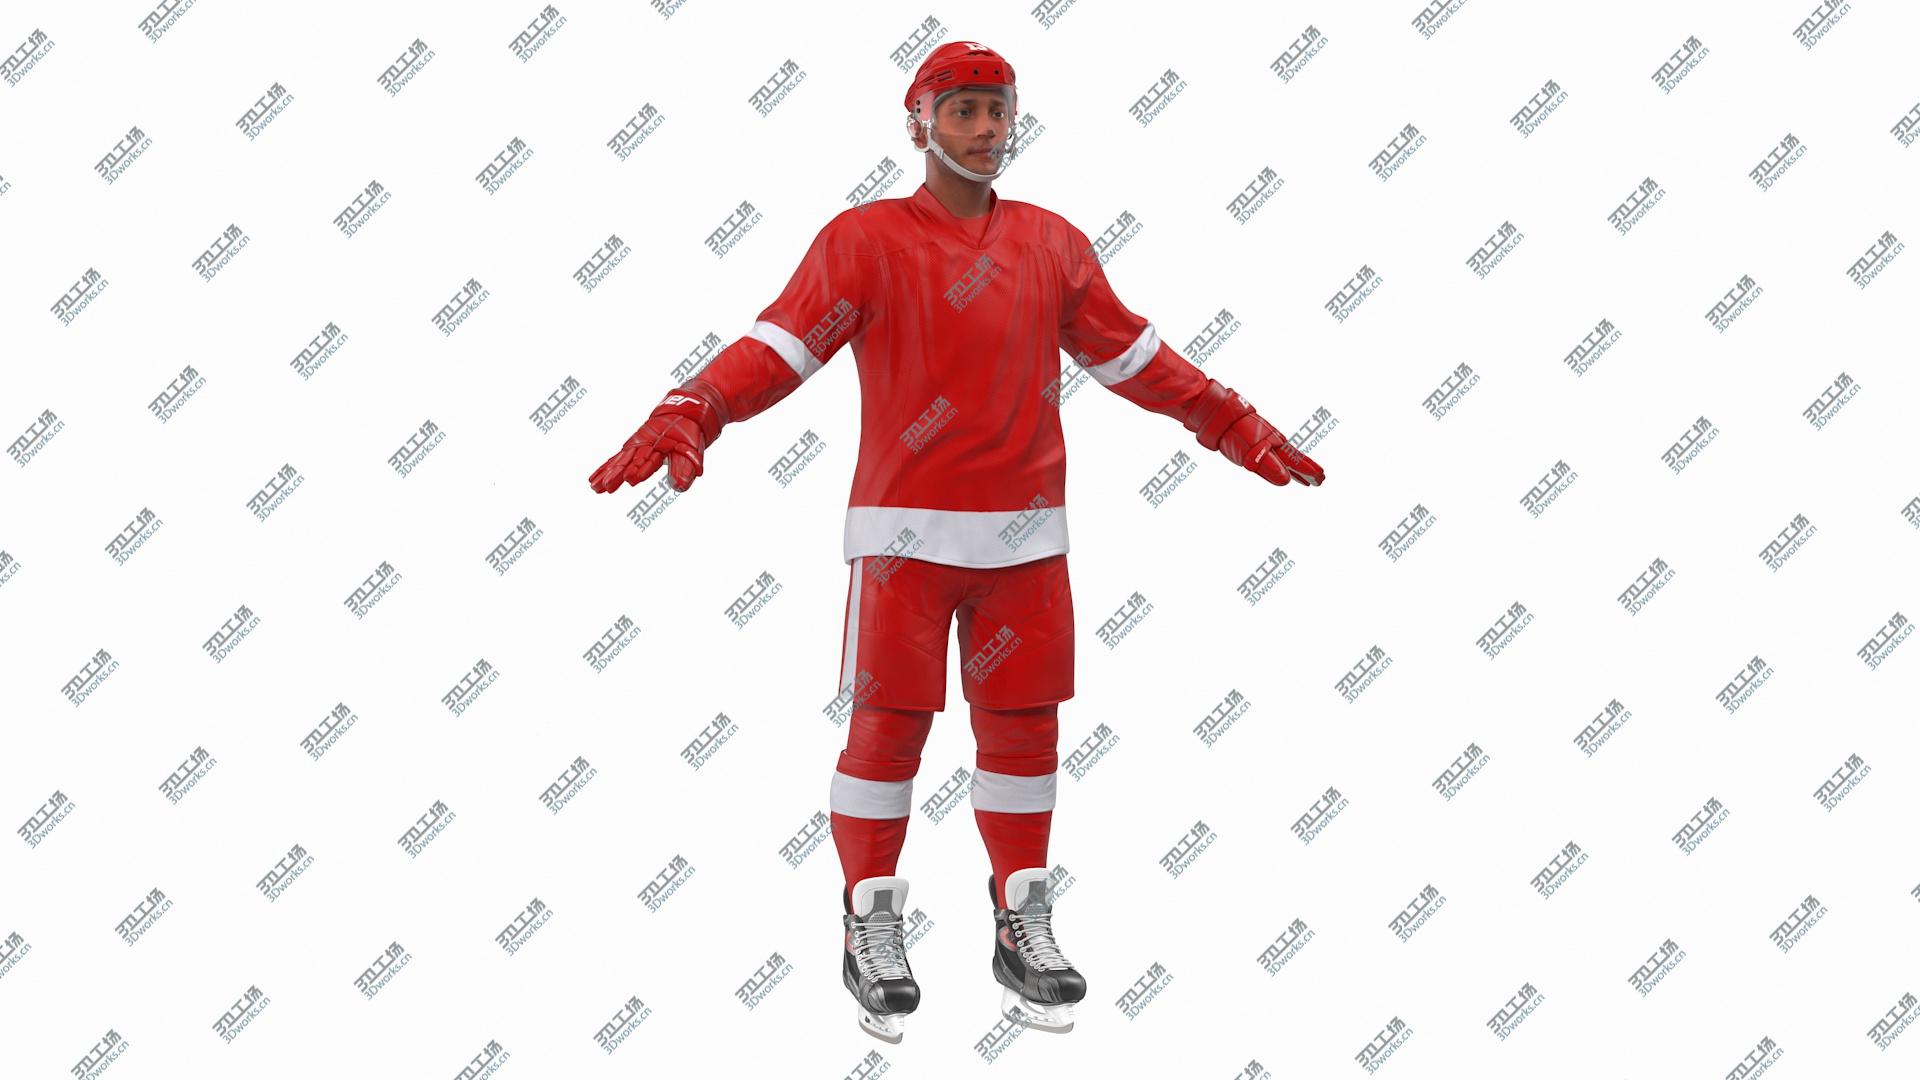 images/goods_img/202104092/3D Hockey Player Red/4.jpg